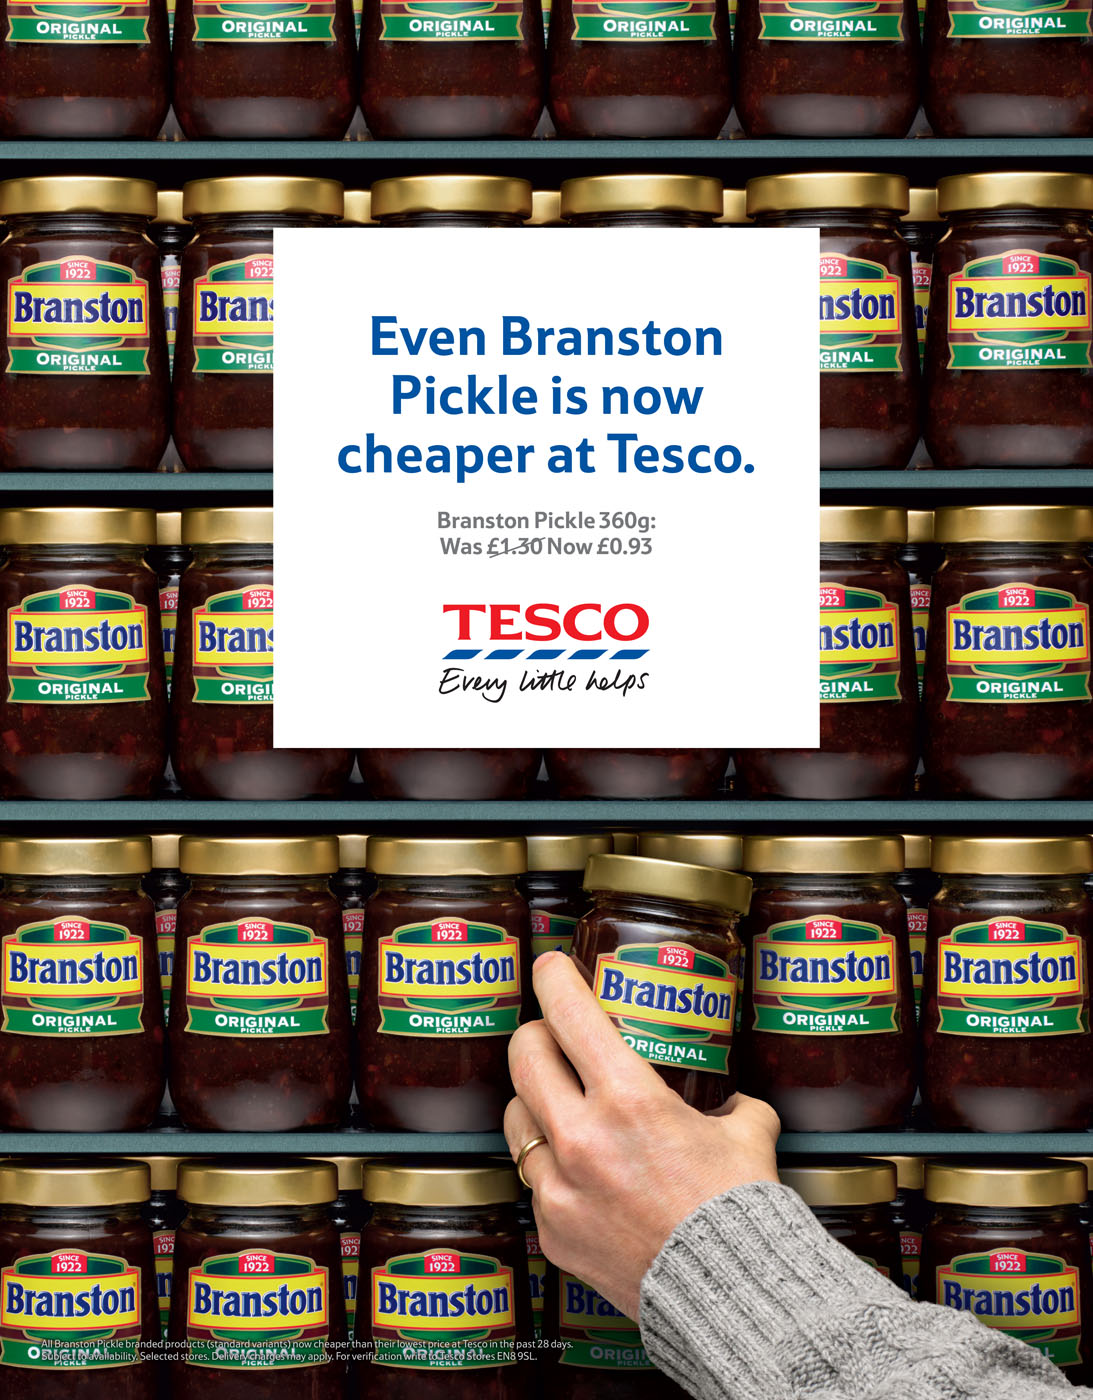 Branston pickle stacked on massive shelf in Tesco by Alexander Kent London based still life and product photographer.